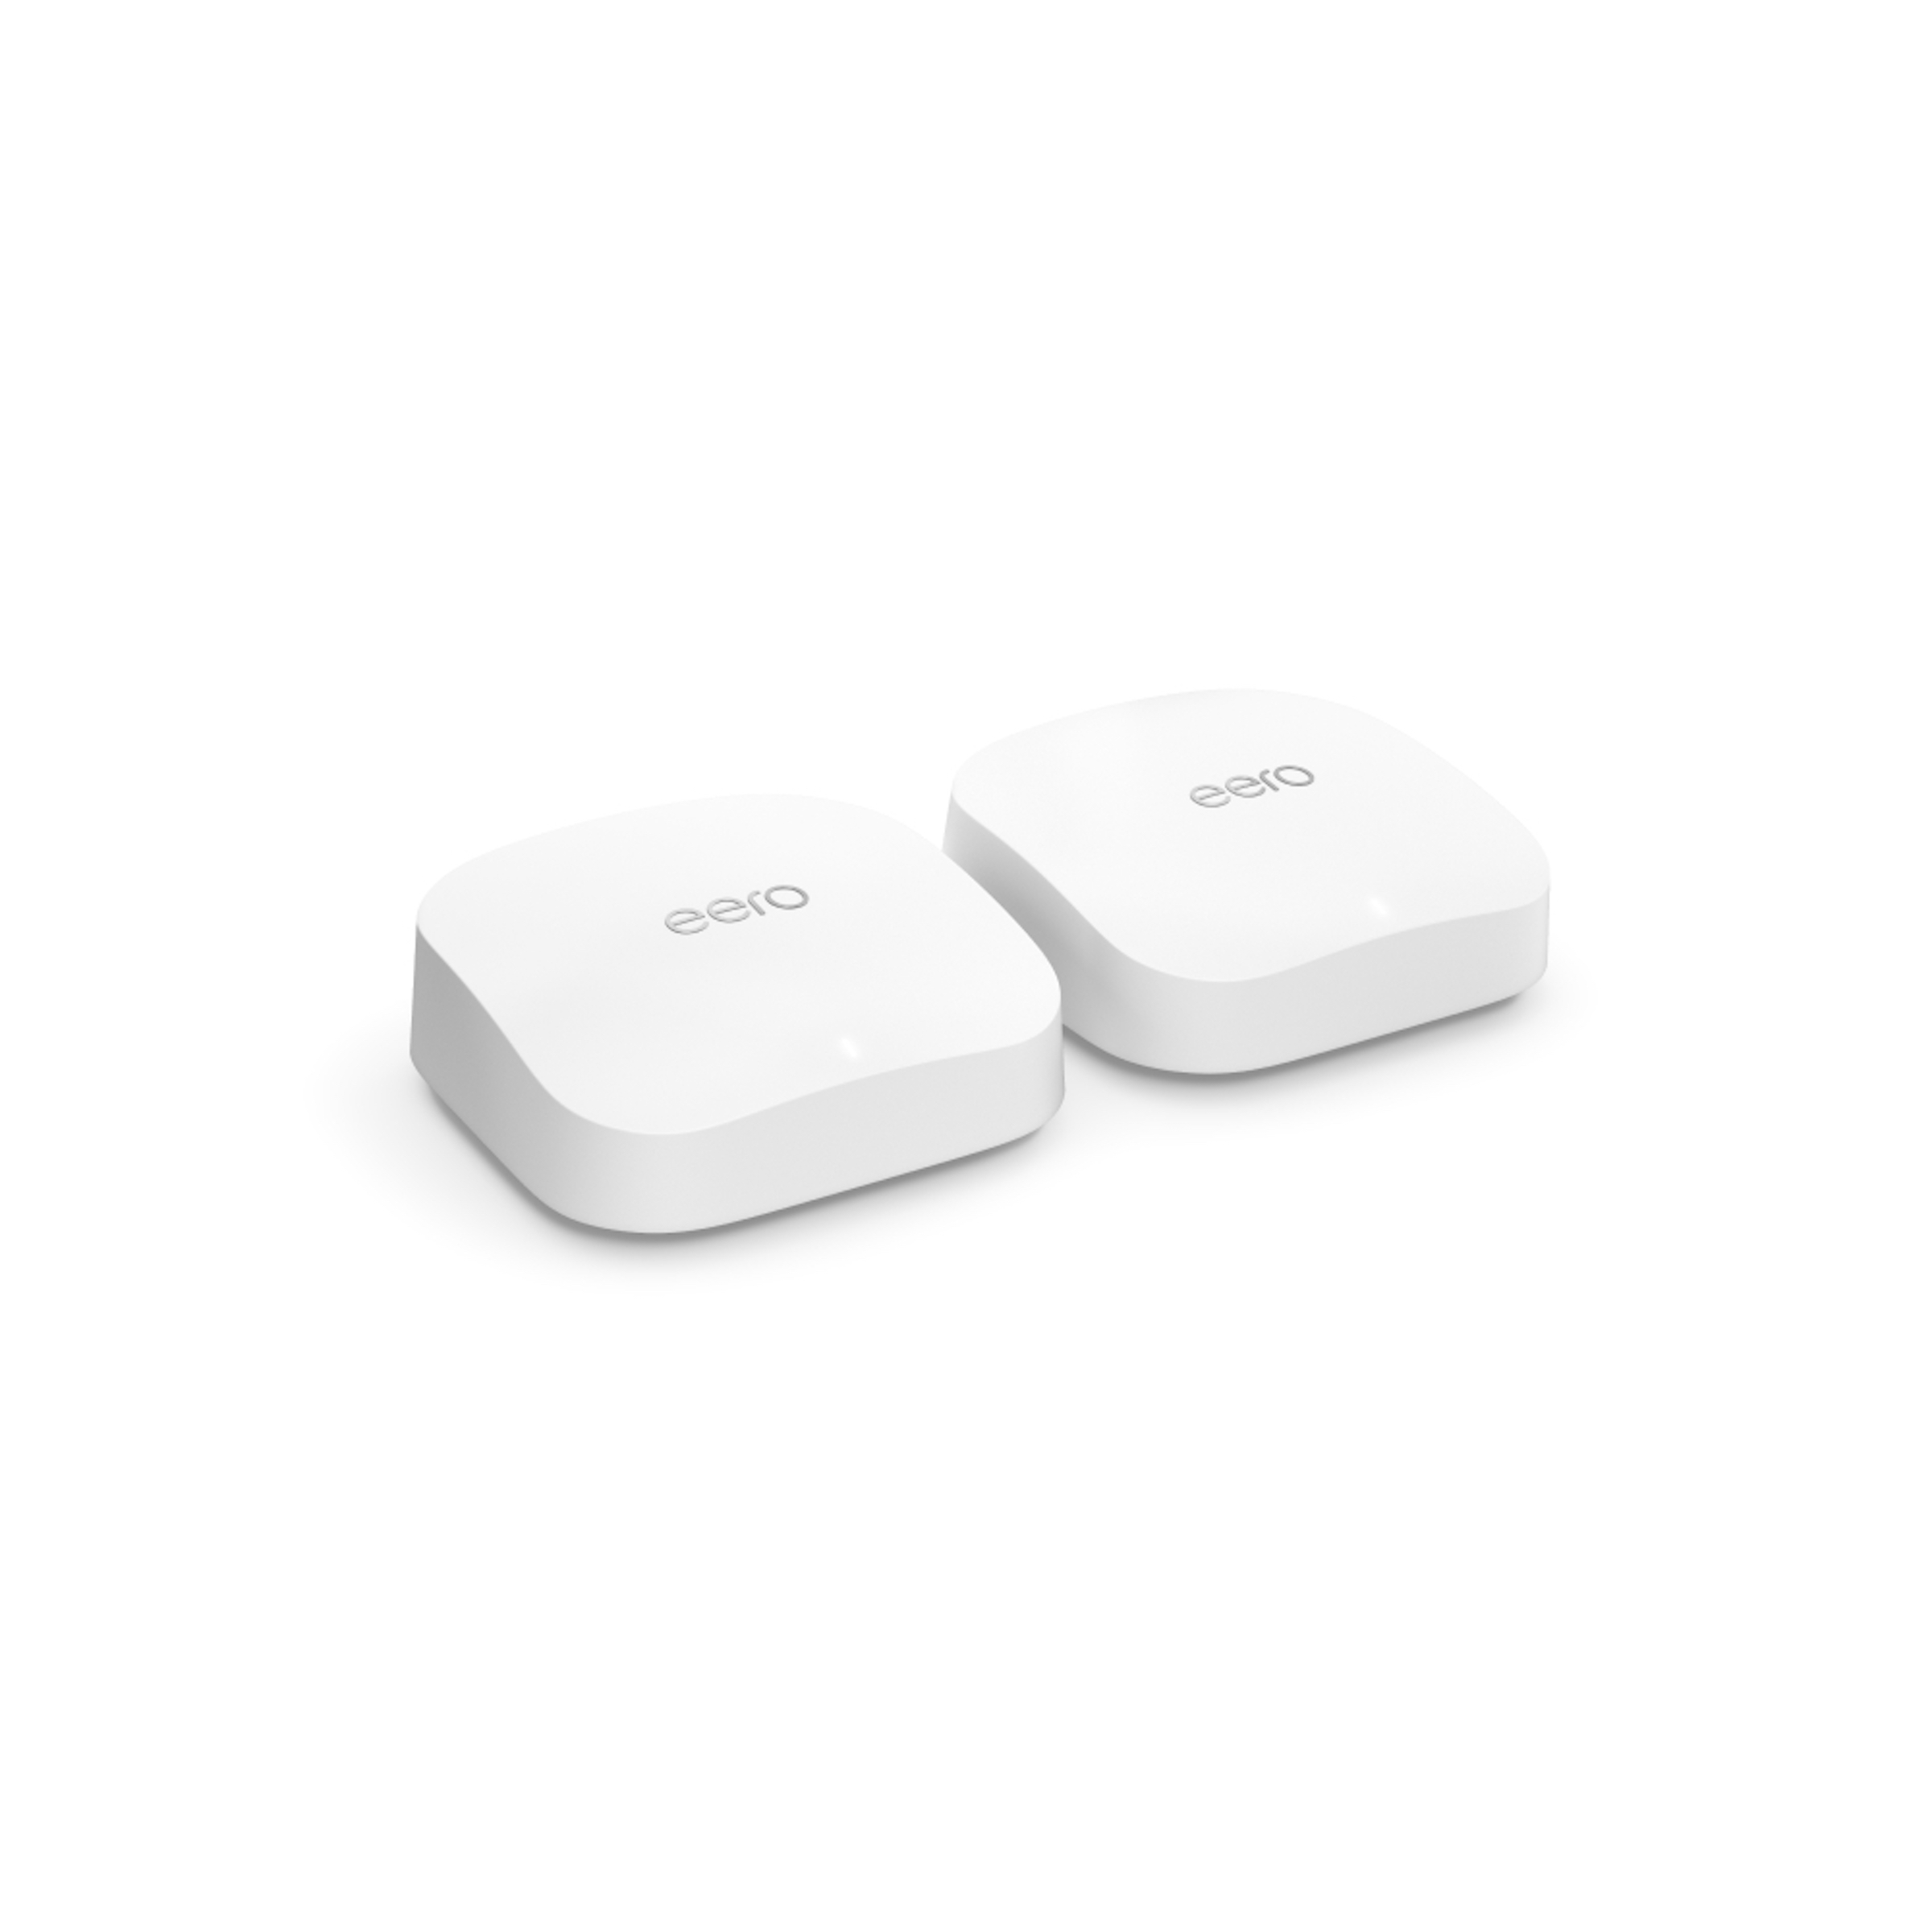 eero Max 7 BE20800 Tri-Band Mesh Wi-Fi 7 Router White V010111 - Best Buy